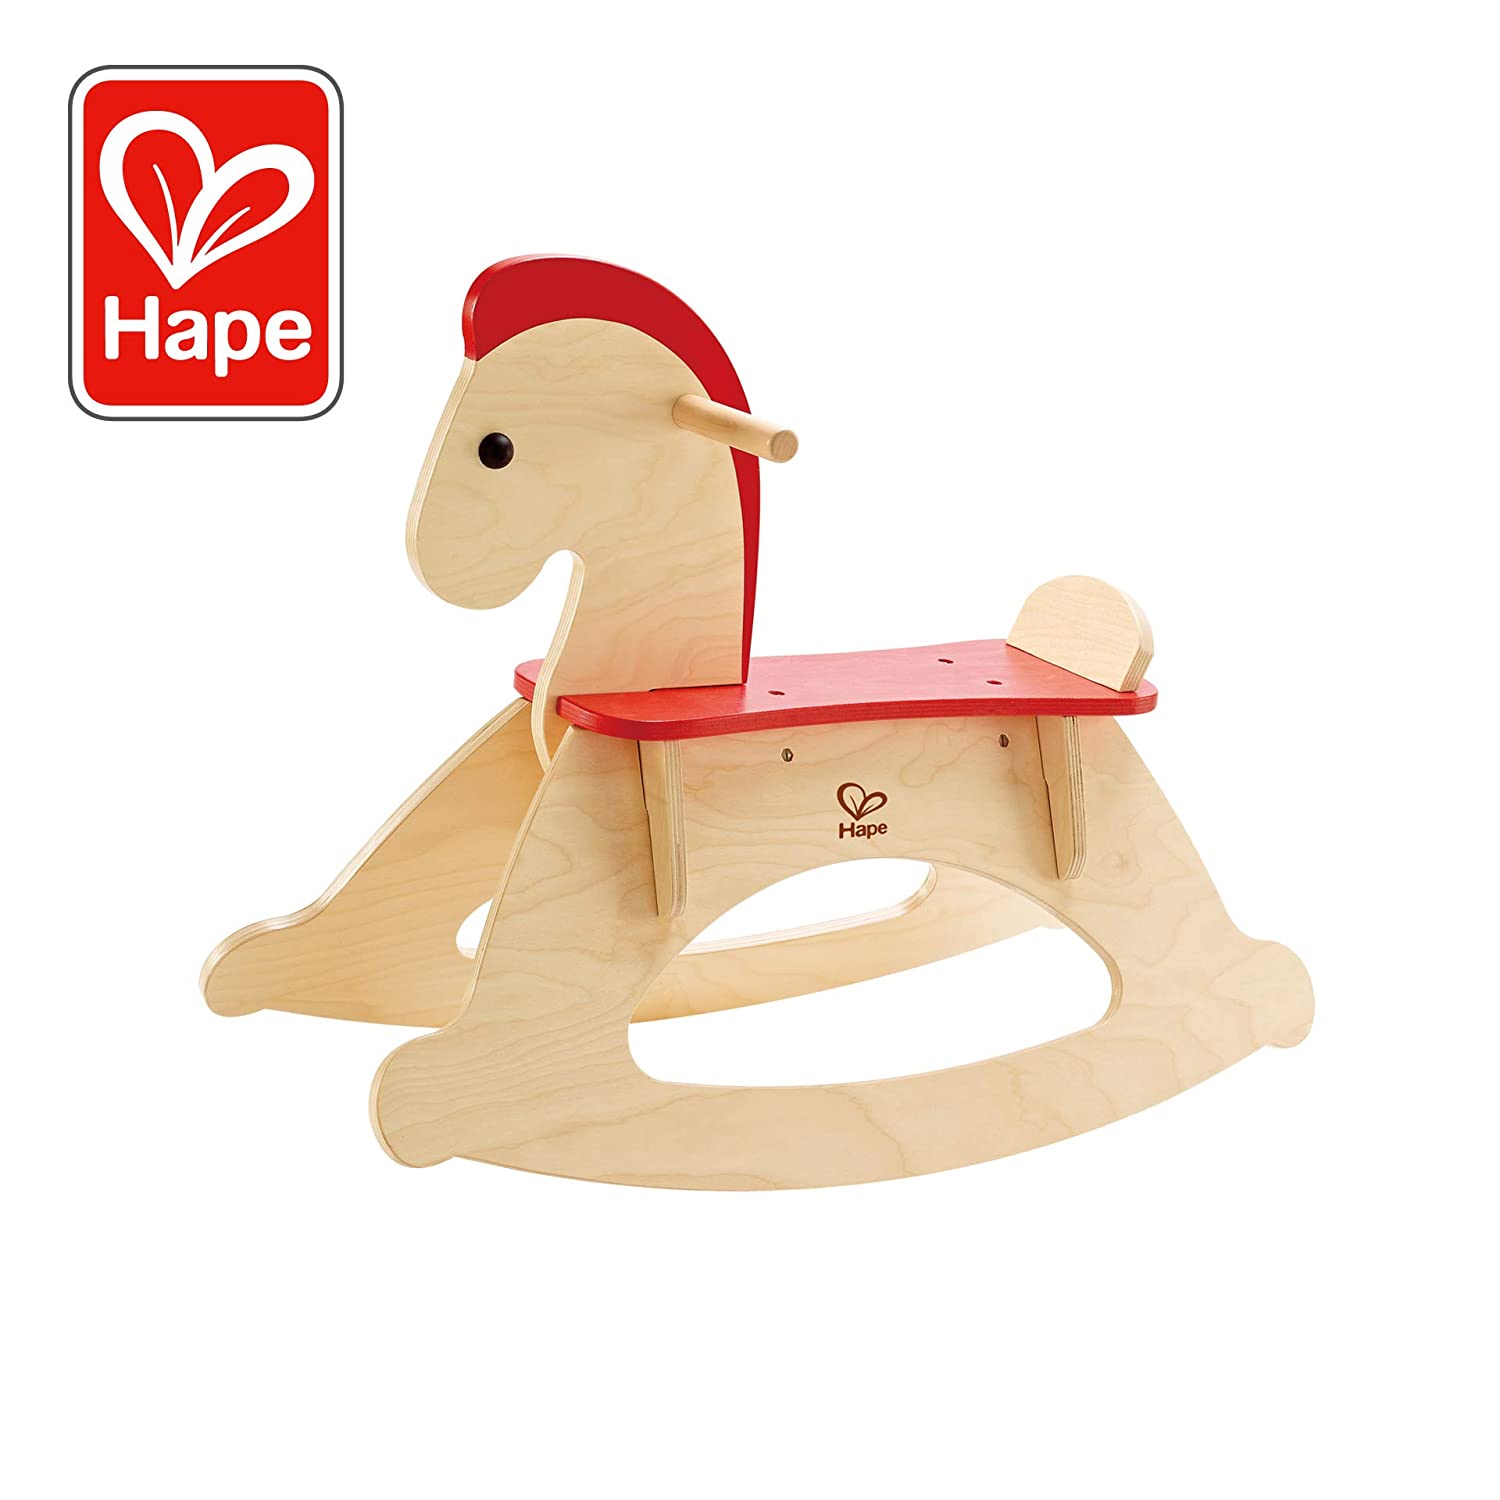 Top 9 Best Rocking Horses Toy Reviews in 2022 6